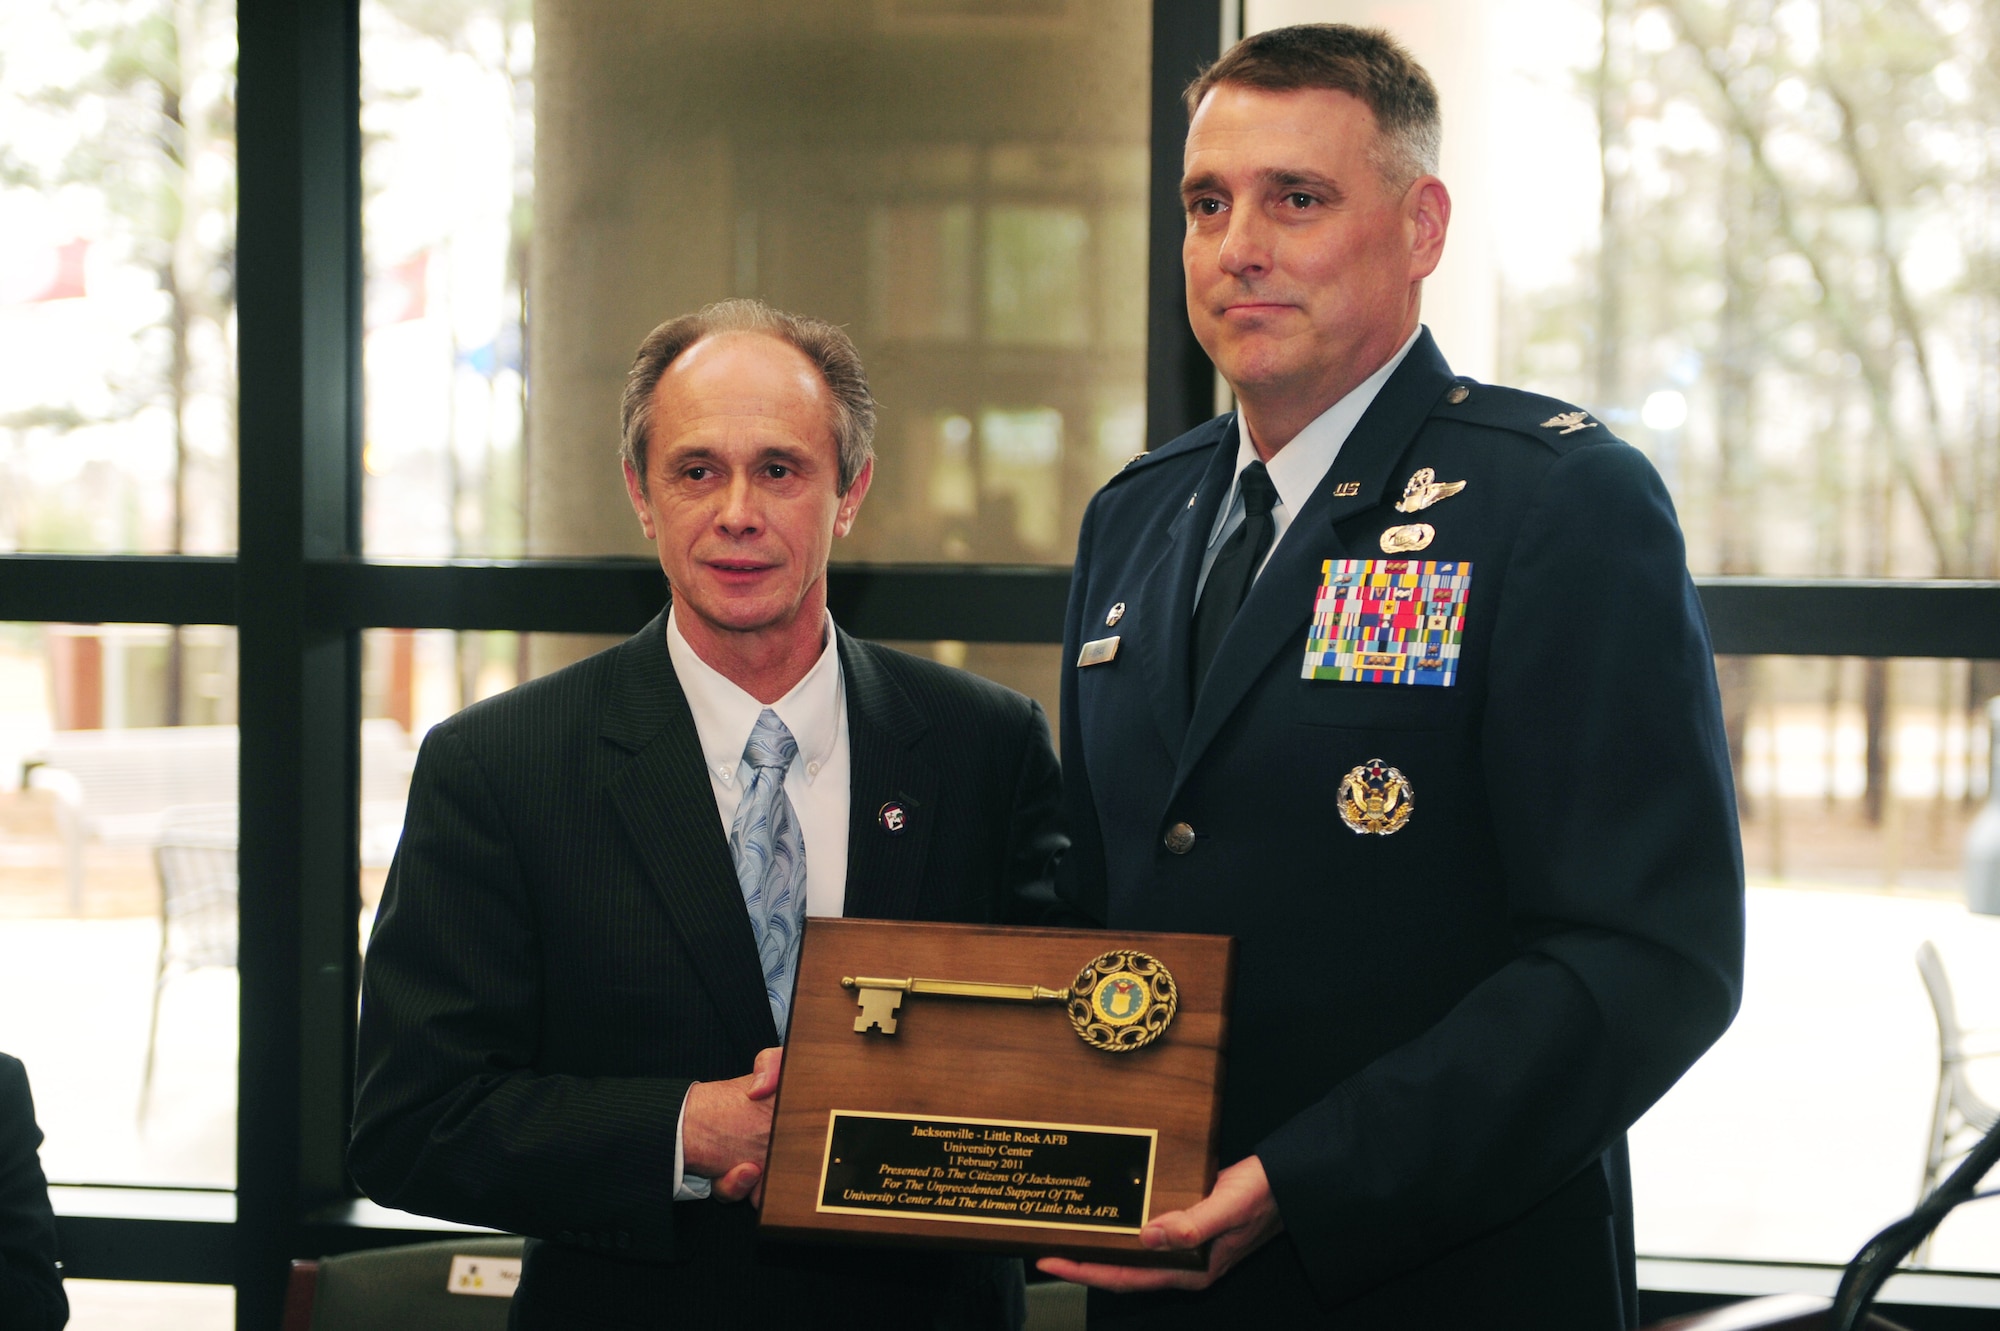 Col. Mike Minihan (right), 19th Airlift Wing commander, hands a key to Jacksonville Mayor Gary Fletcher, during the grand opening of the Jacksonville-Little Rock Air Force Base University Center Feb. 1, 2011, at Little Rock Air Force Base, Ark. Colonel Minihan presented the award to the citizens of Jacksonville for the unprecedented support of the University Center and the Airmen of Little Rock Air Force Base. (Photo by U.S. Air Force Senior Airman Jim Araos)